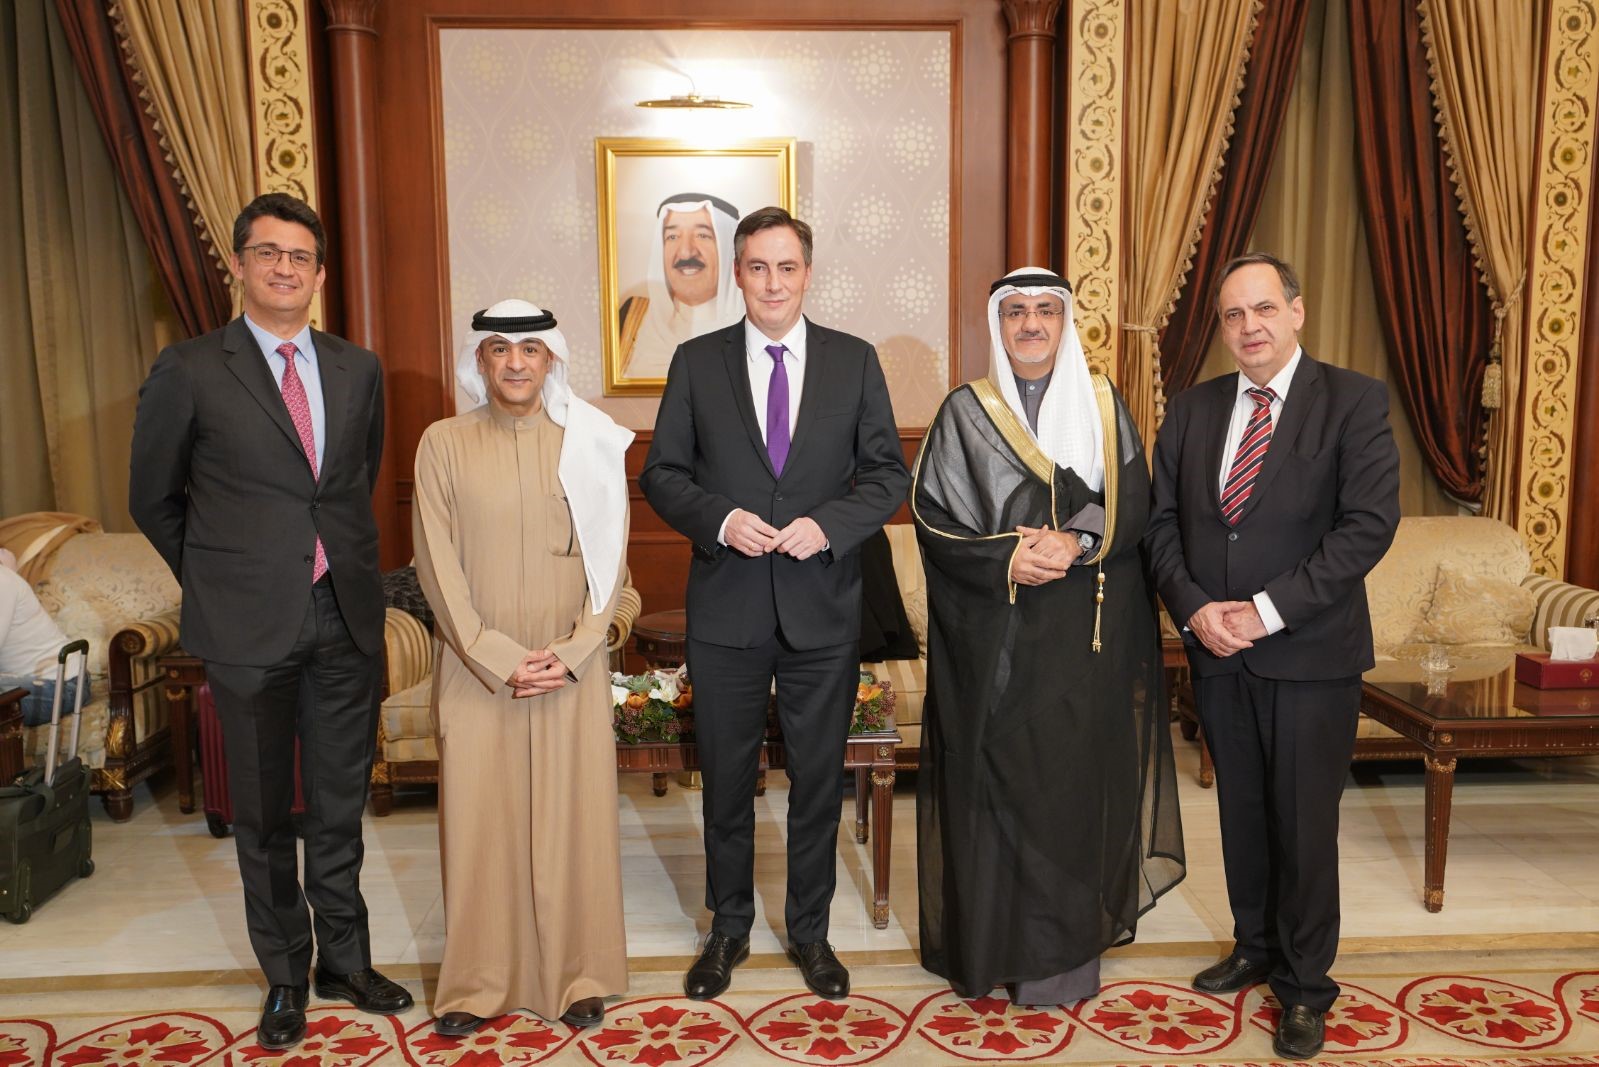 Chair of the European Parliament Foreign Affairs Committee and Vice President of the European People's Party David McAllister arrives in Kuwait